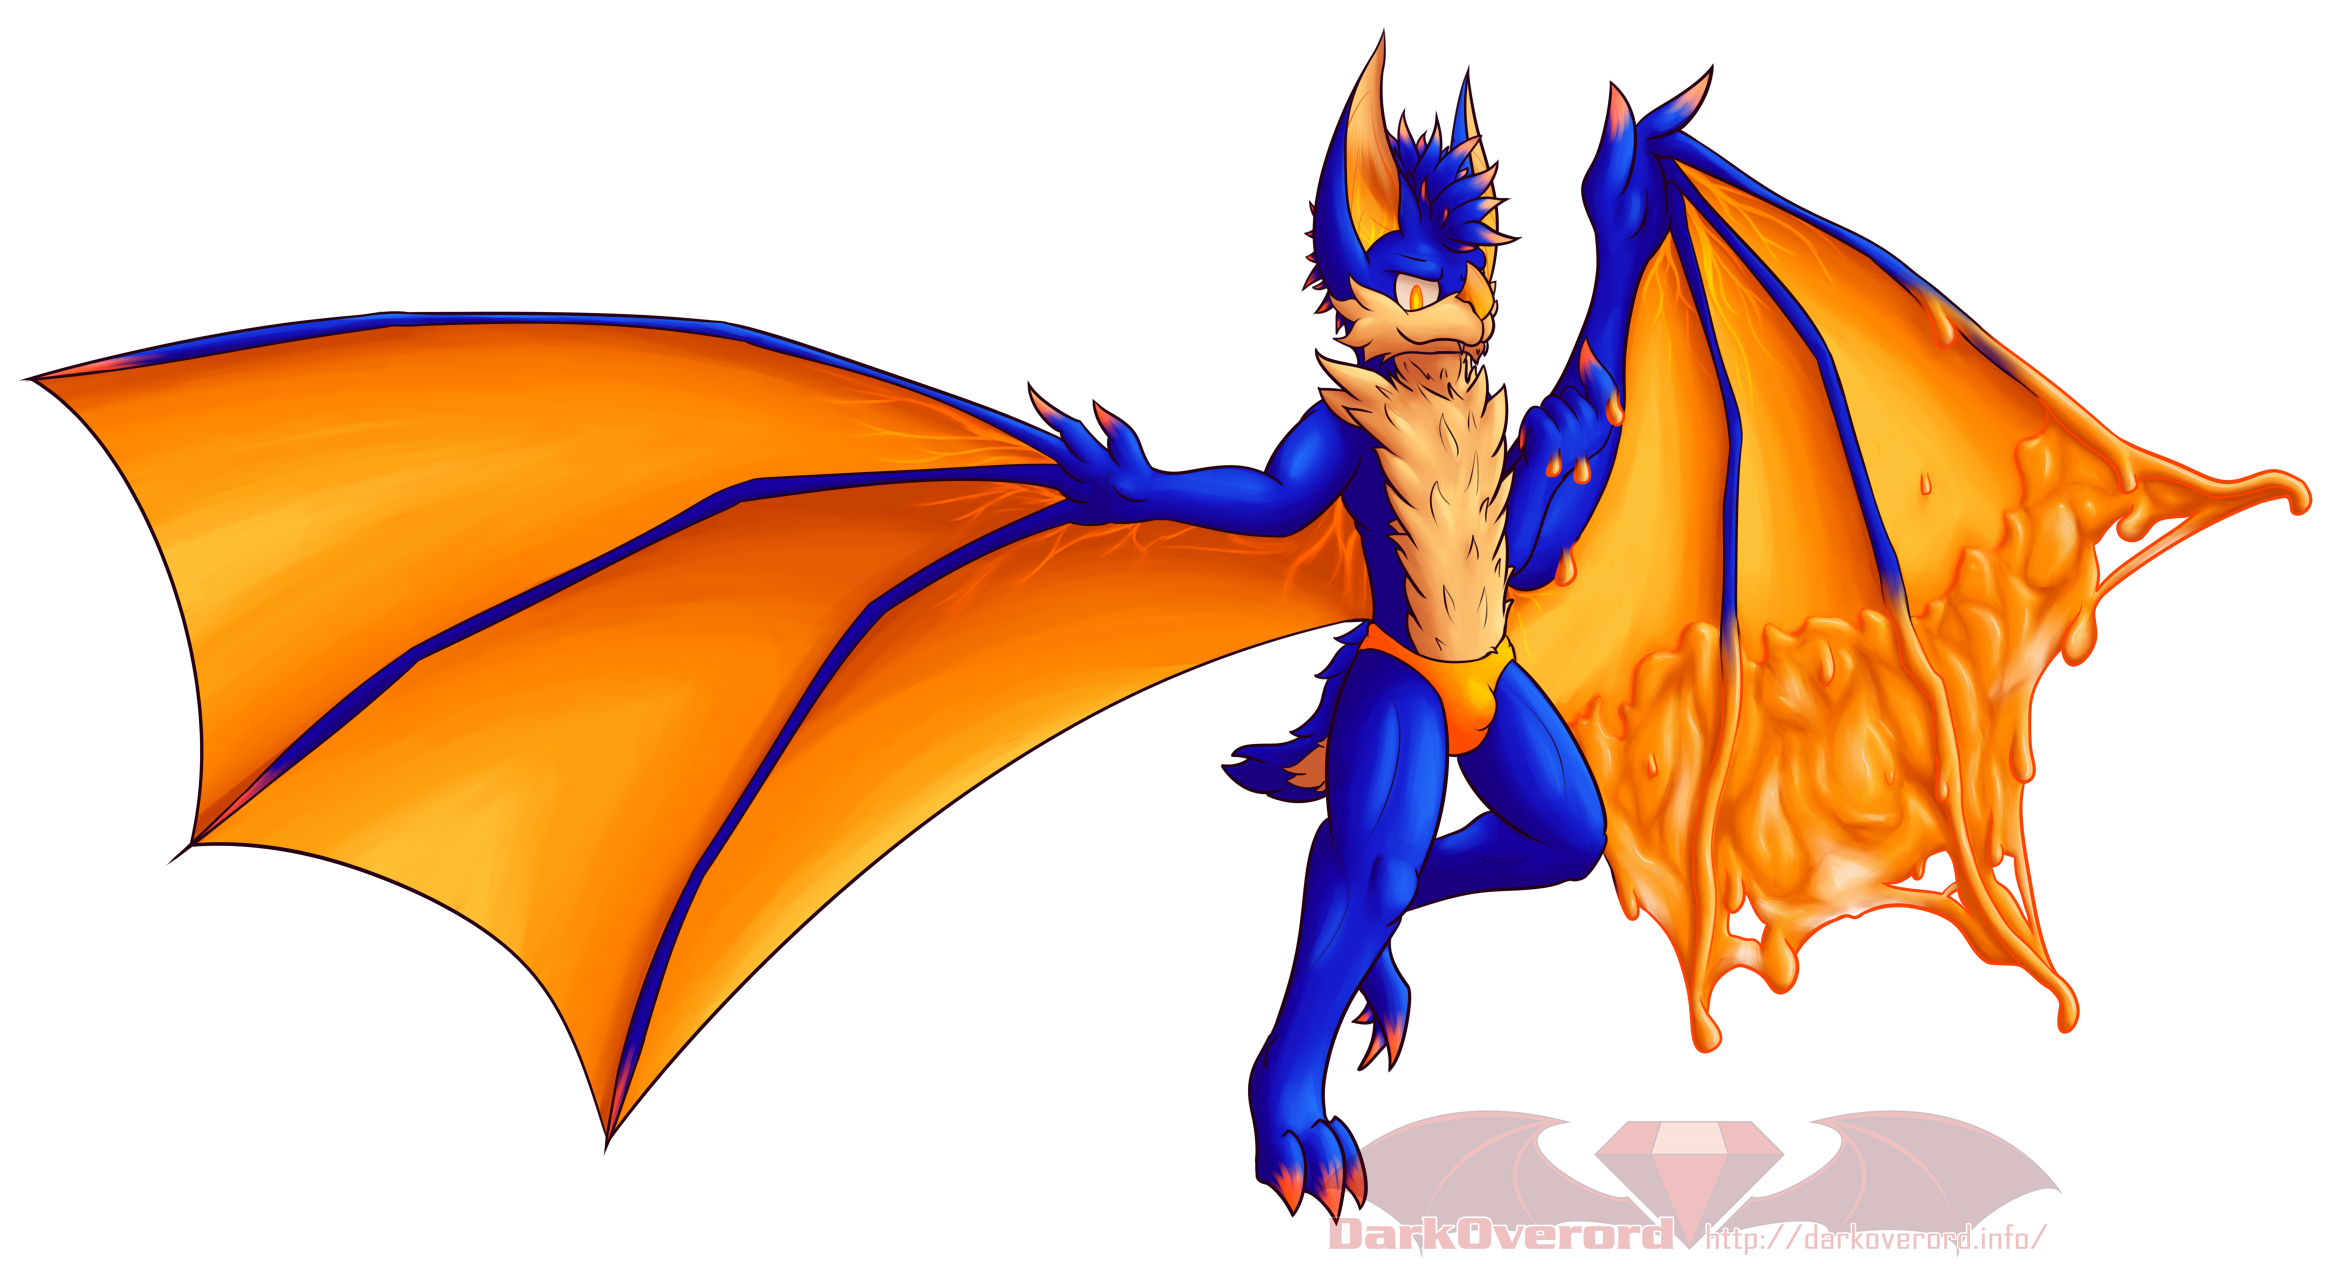 Ferris, a blue and orange bat, with glowing orange eyes, ears, nose and calws seemingly in the air They have their right arm as a normal bat wing, while their left arm is normal, albeit dripping a little goo However they have a right wing coming off their back that is mostly orange goo, signifying it's in the process of shifting shape.